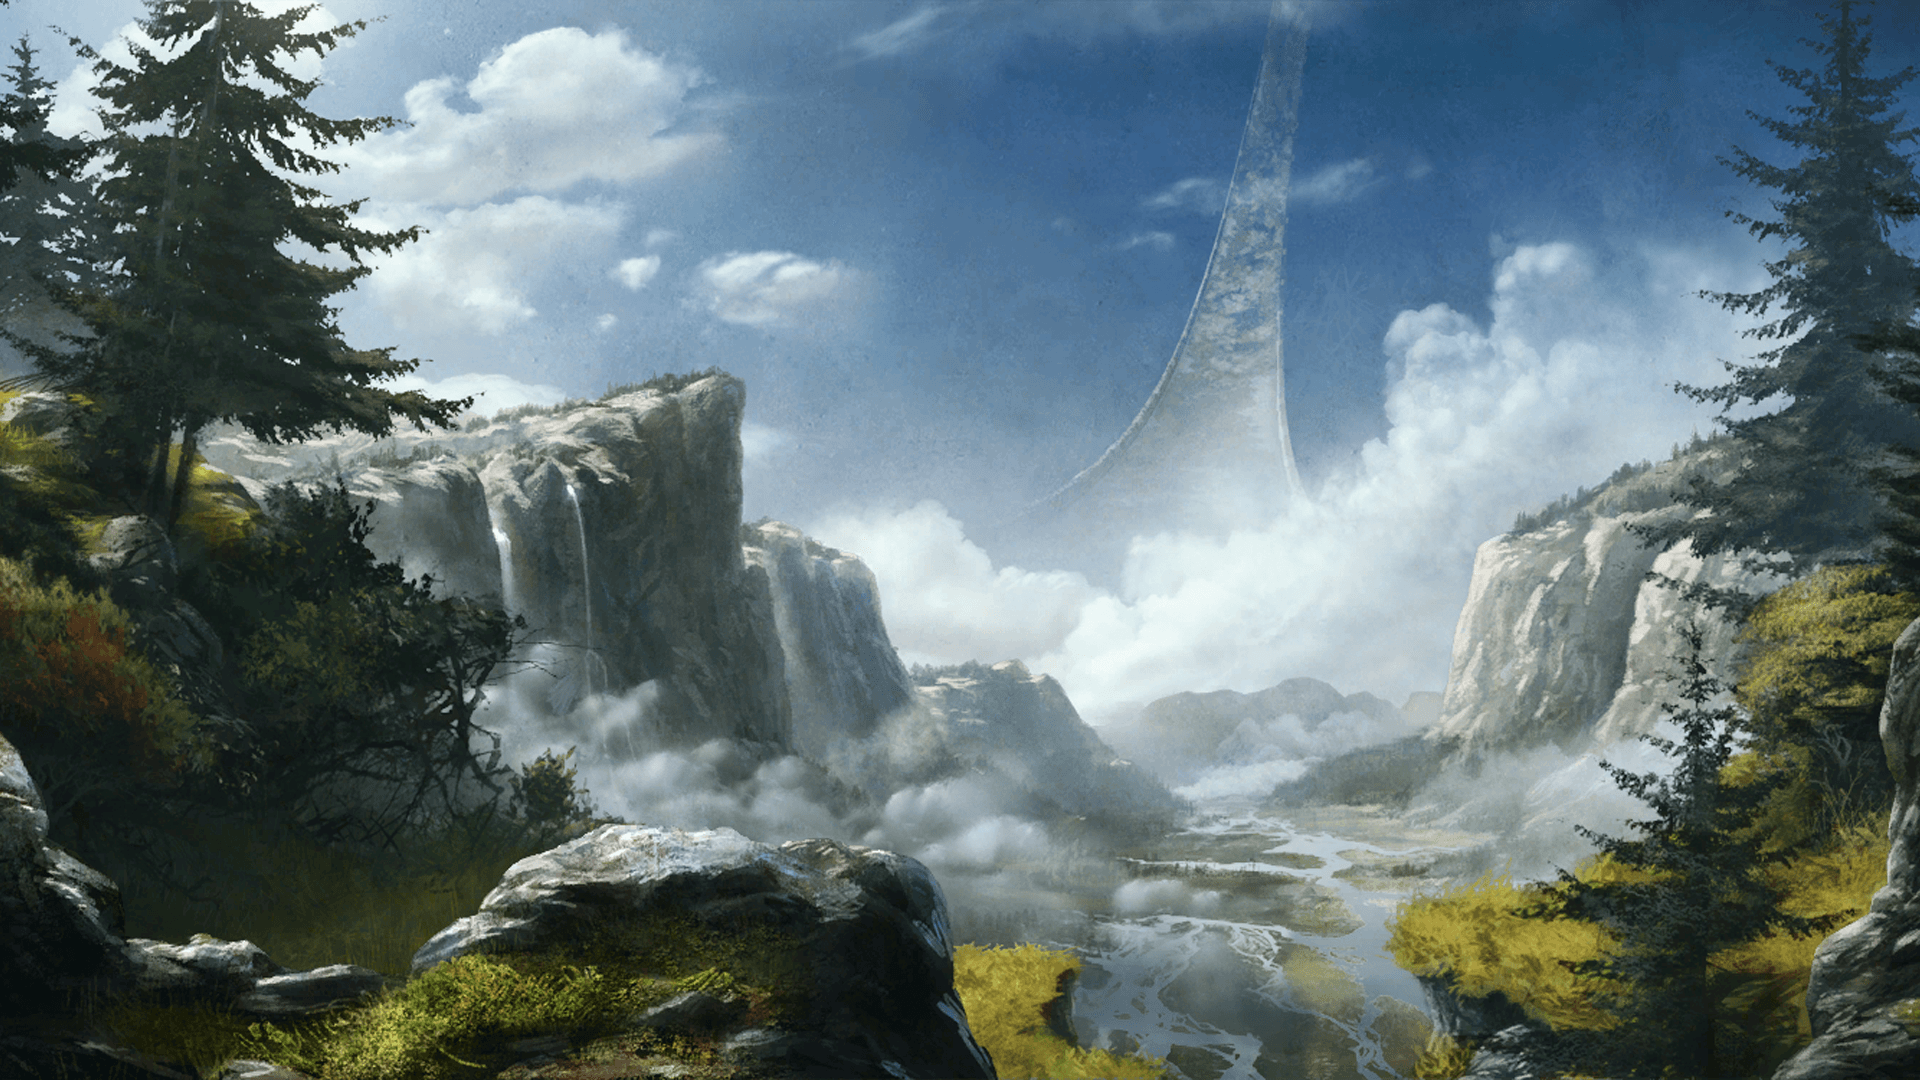 General 1920x1080 Xbox Game Studios Halo (game) video games video game art sky landscape nature science fiction